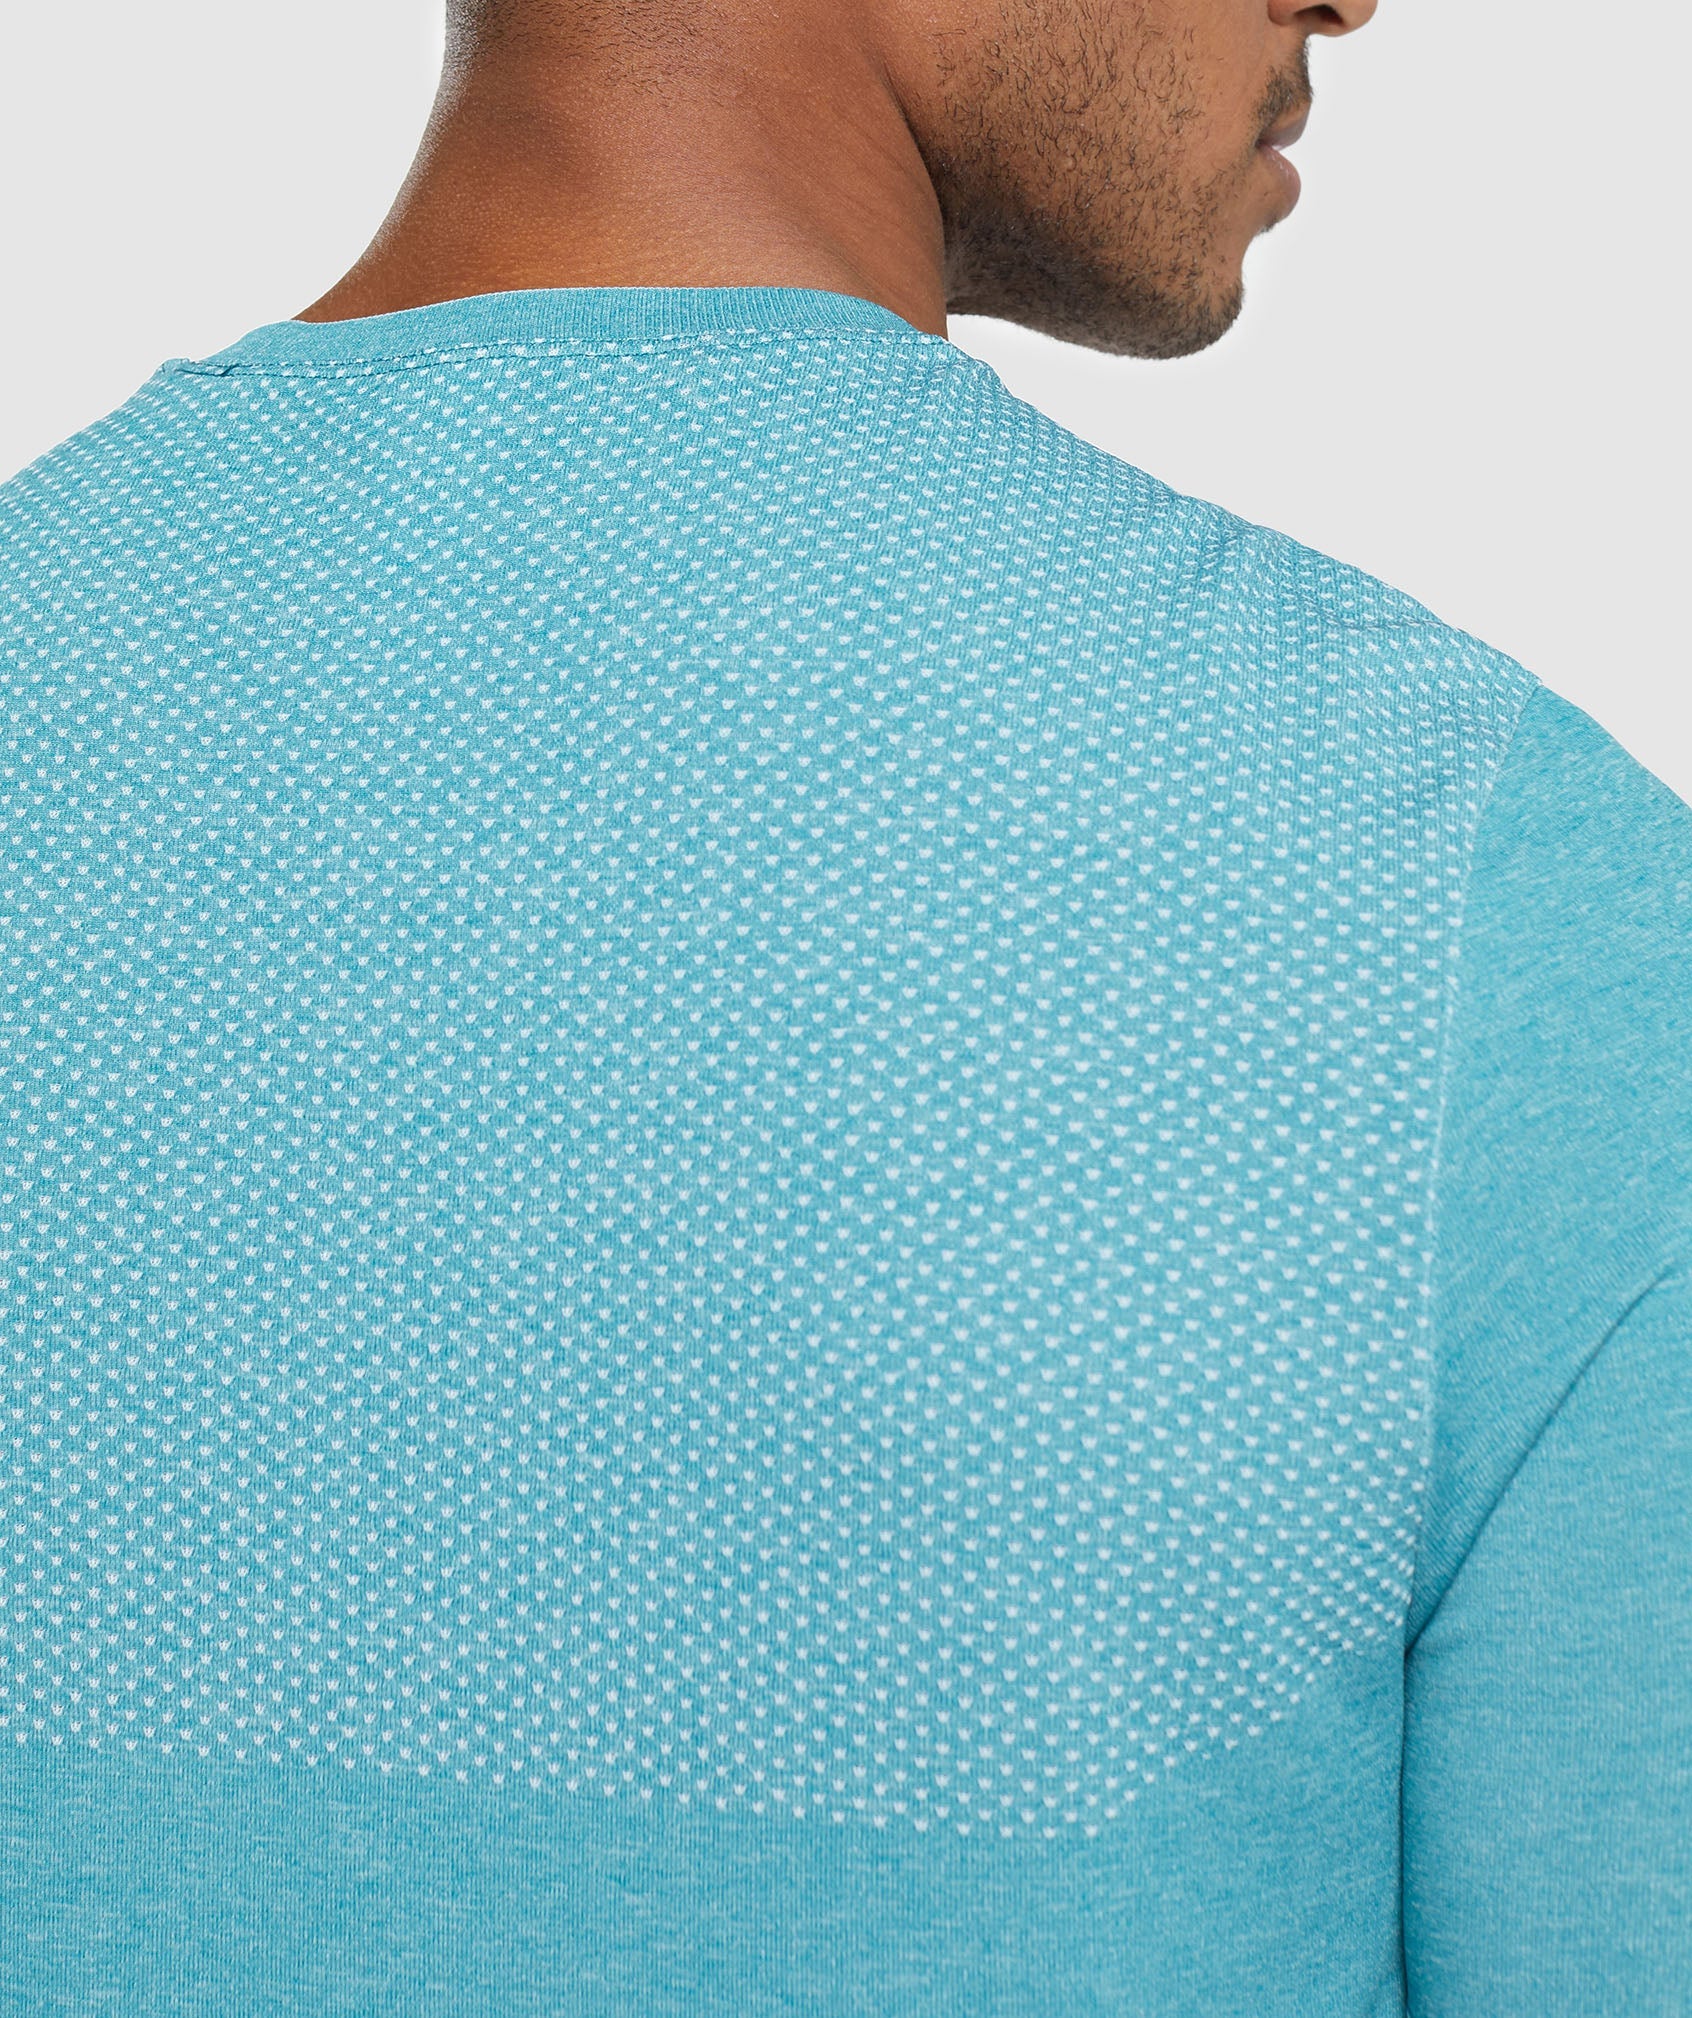 Vital Seamless T-Shirt in Artificial Teal/White Marl - view 6